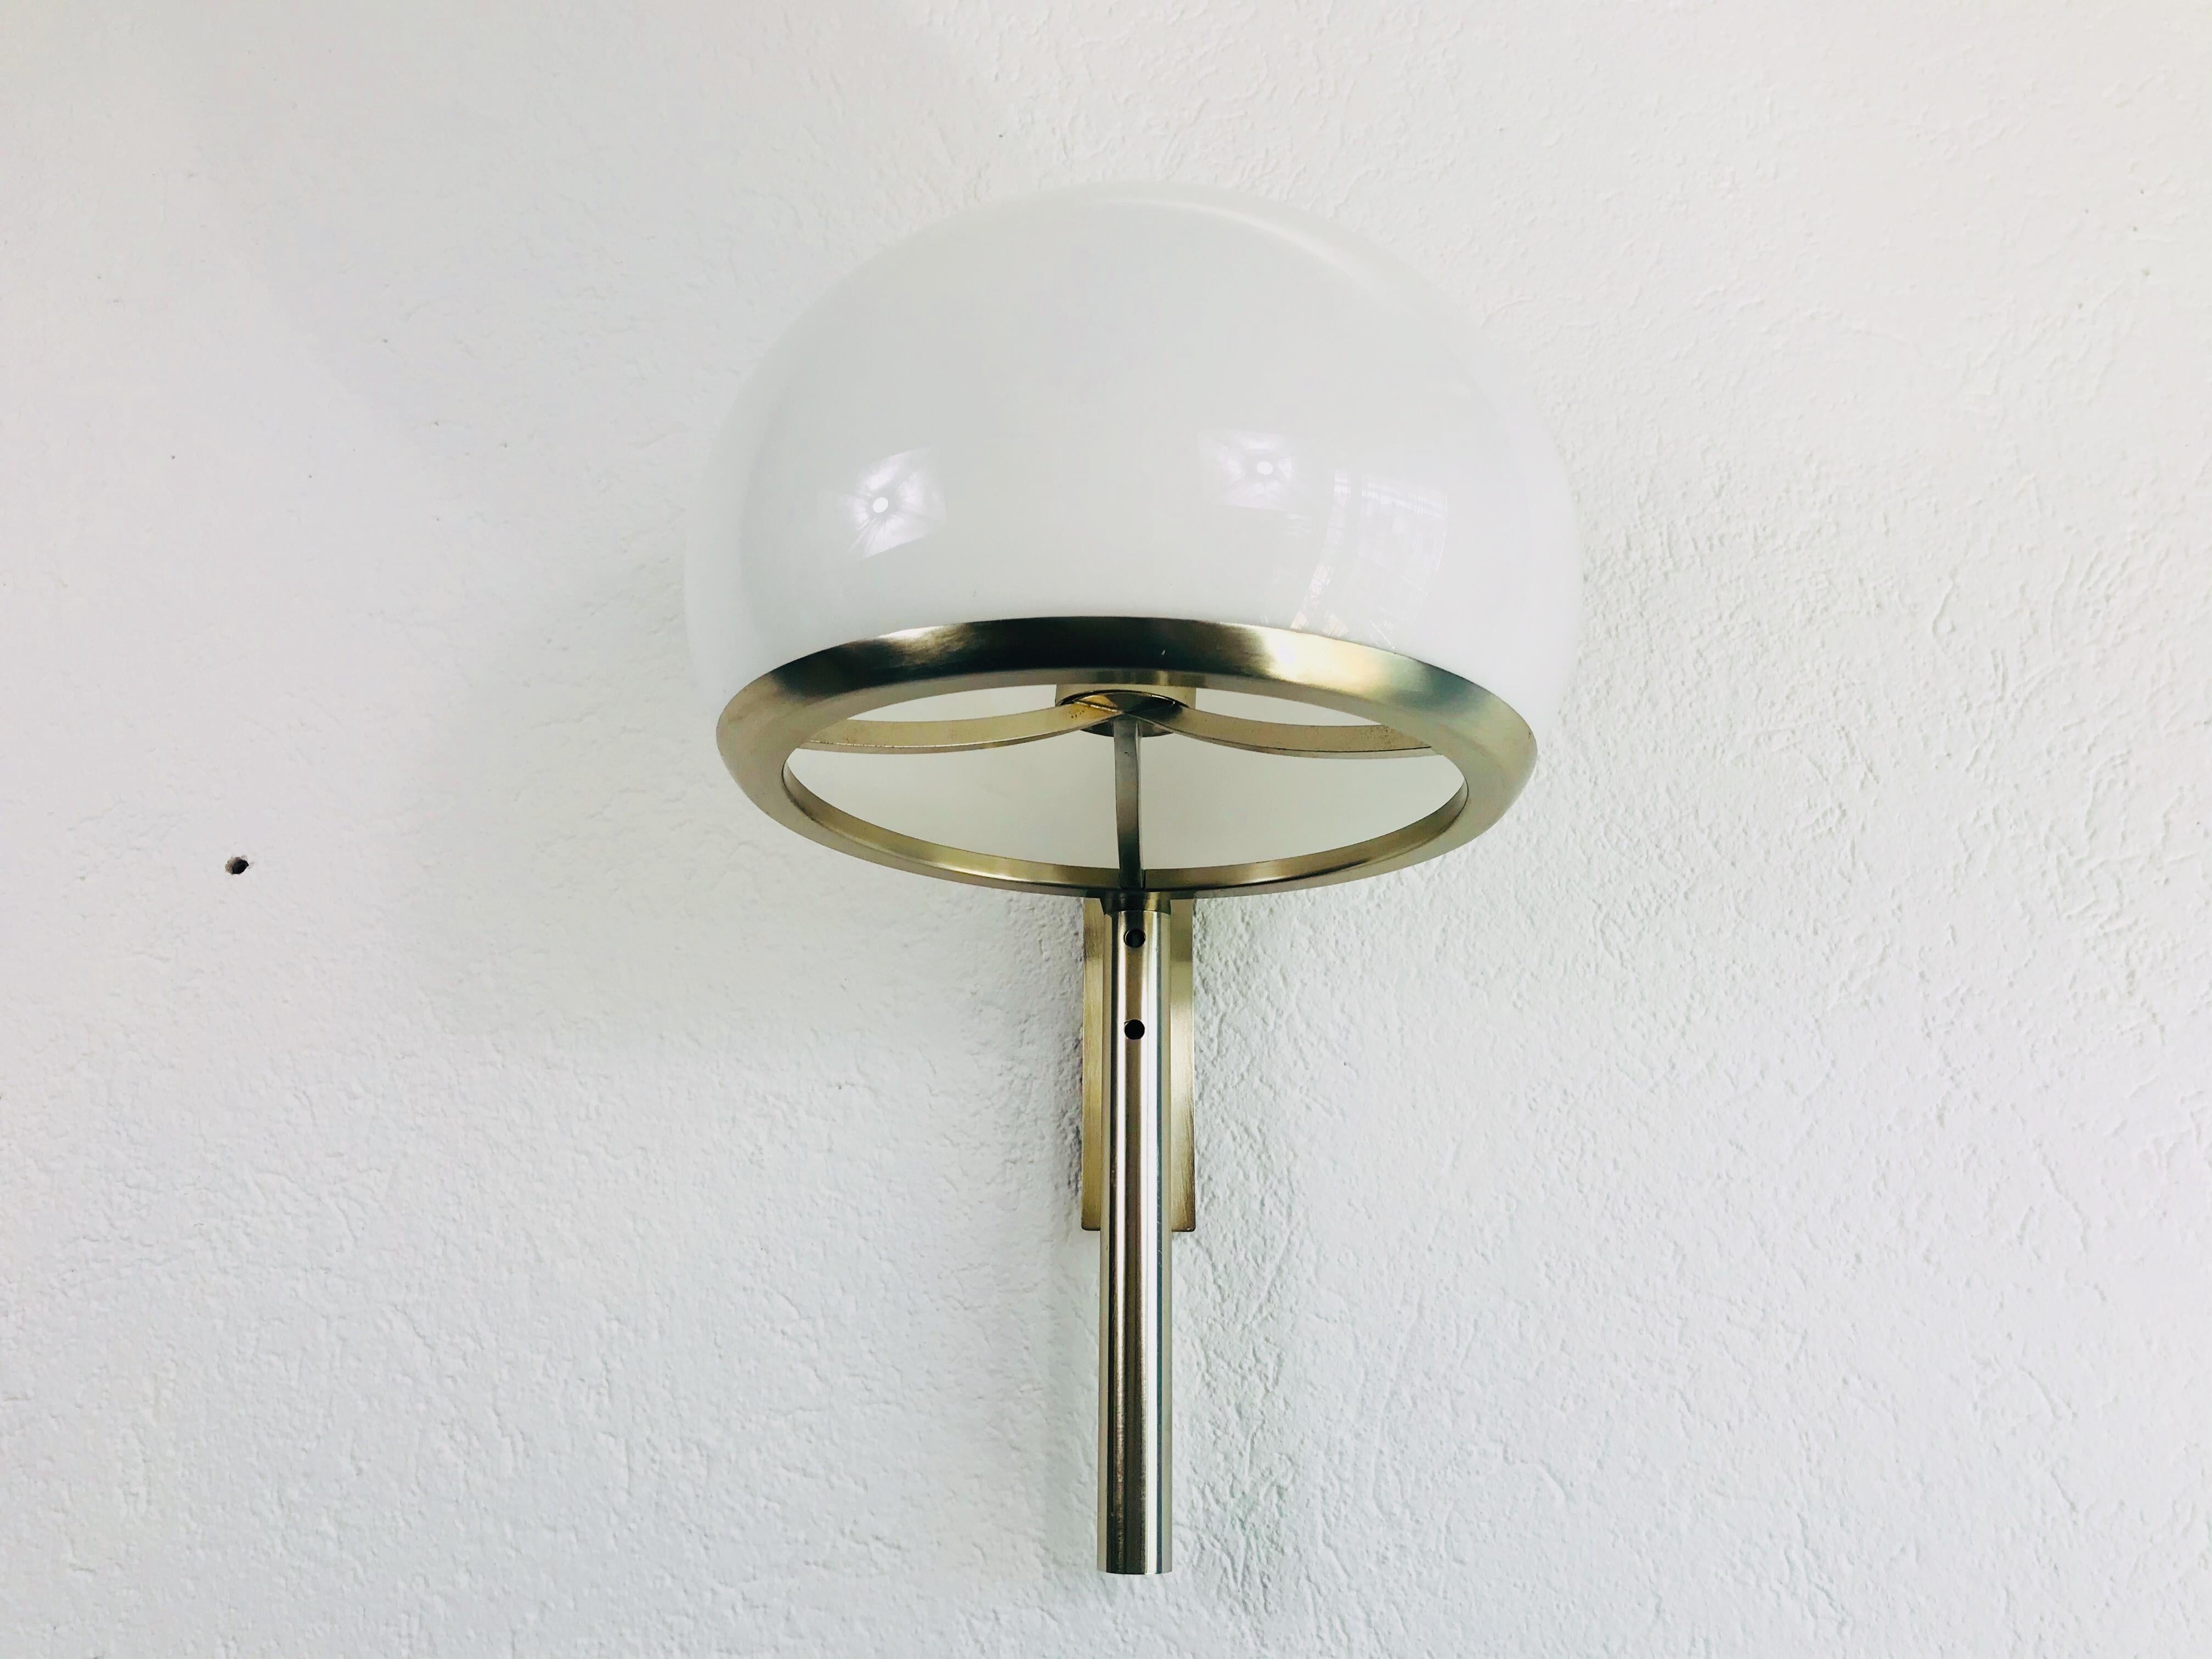 Italian Rare Arteluce Chrome and Perspex Wall Lamp, Italy, 1970s For Sale